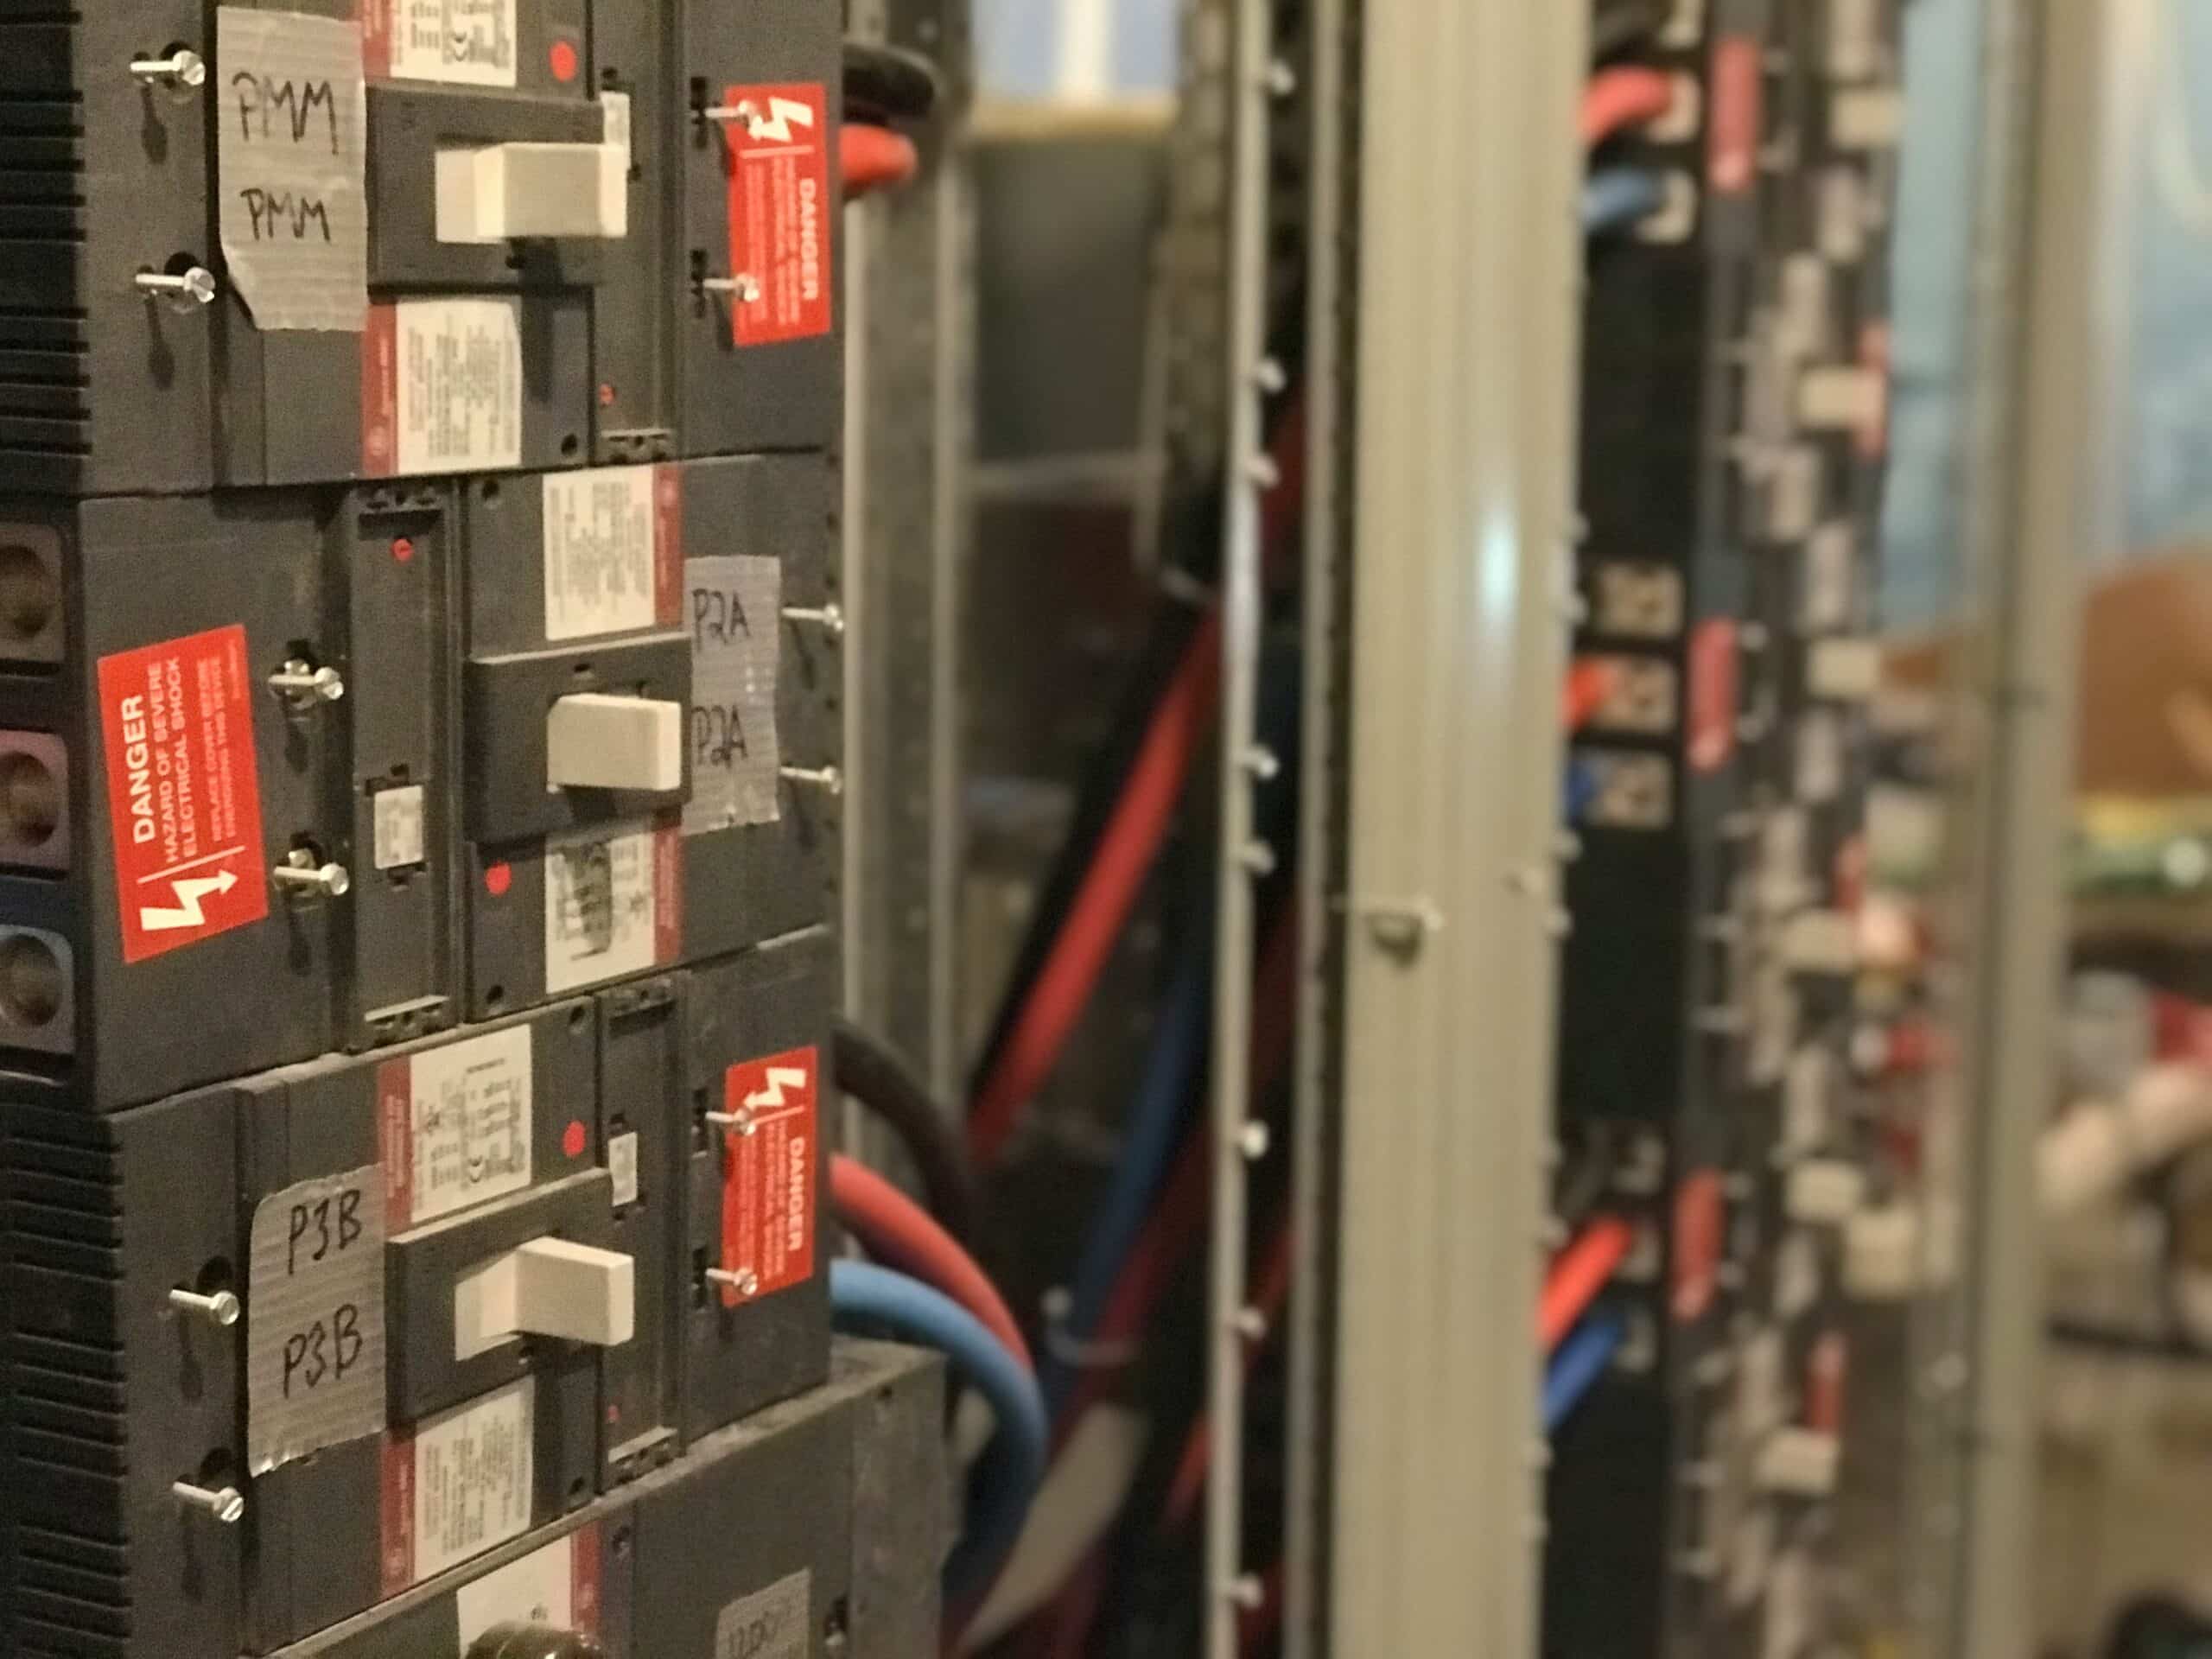 An electrical panel with an open front door